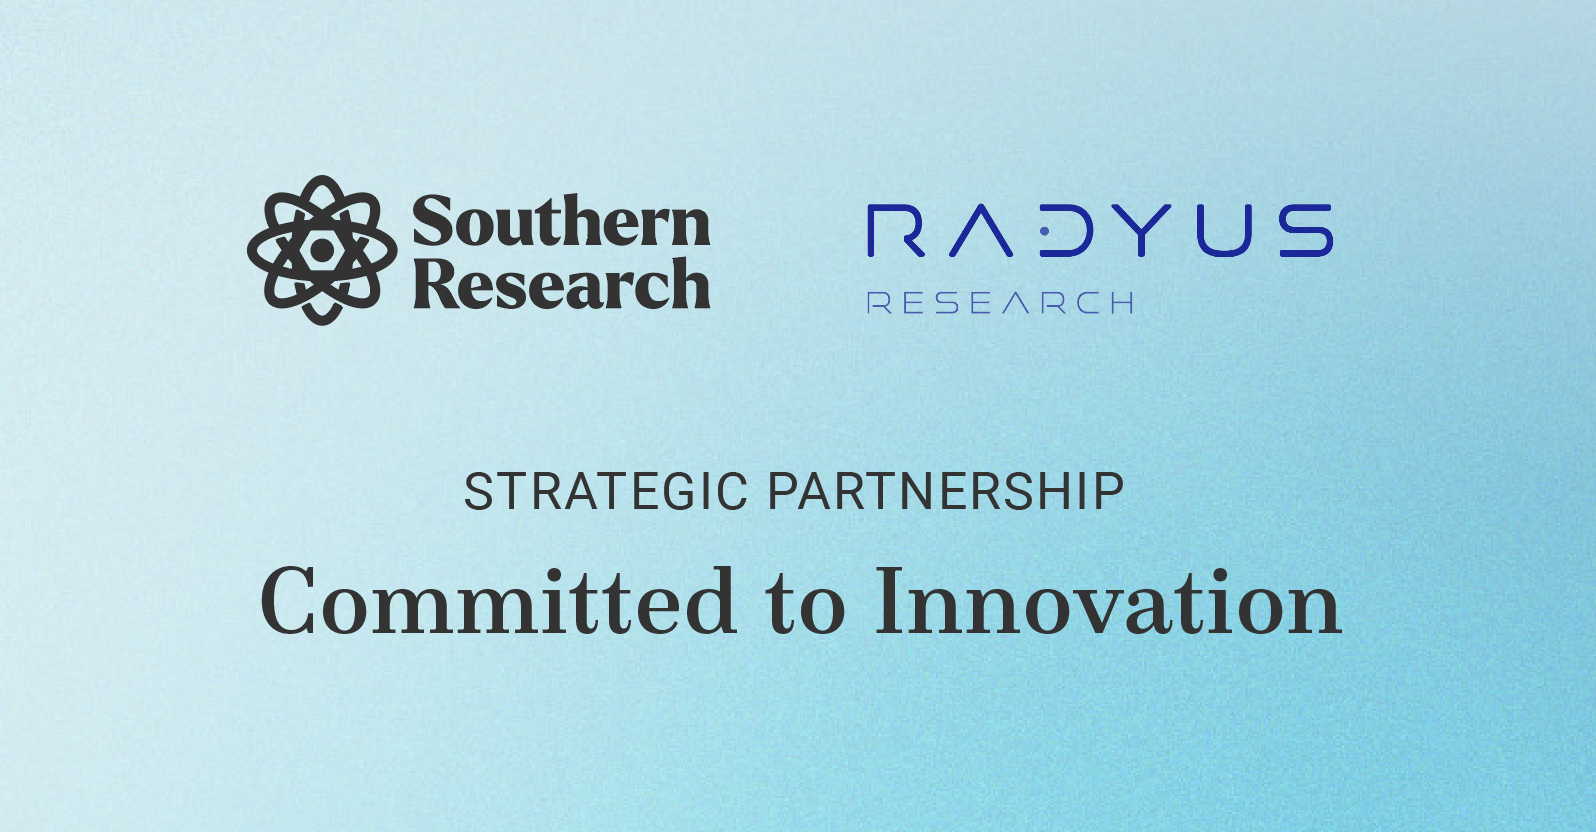 Radyus Research Forges Strategic Partnership with Southern Research to Propel Life Sciences Commercialization